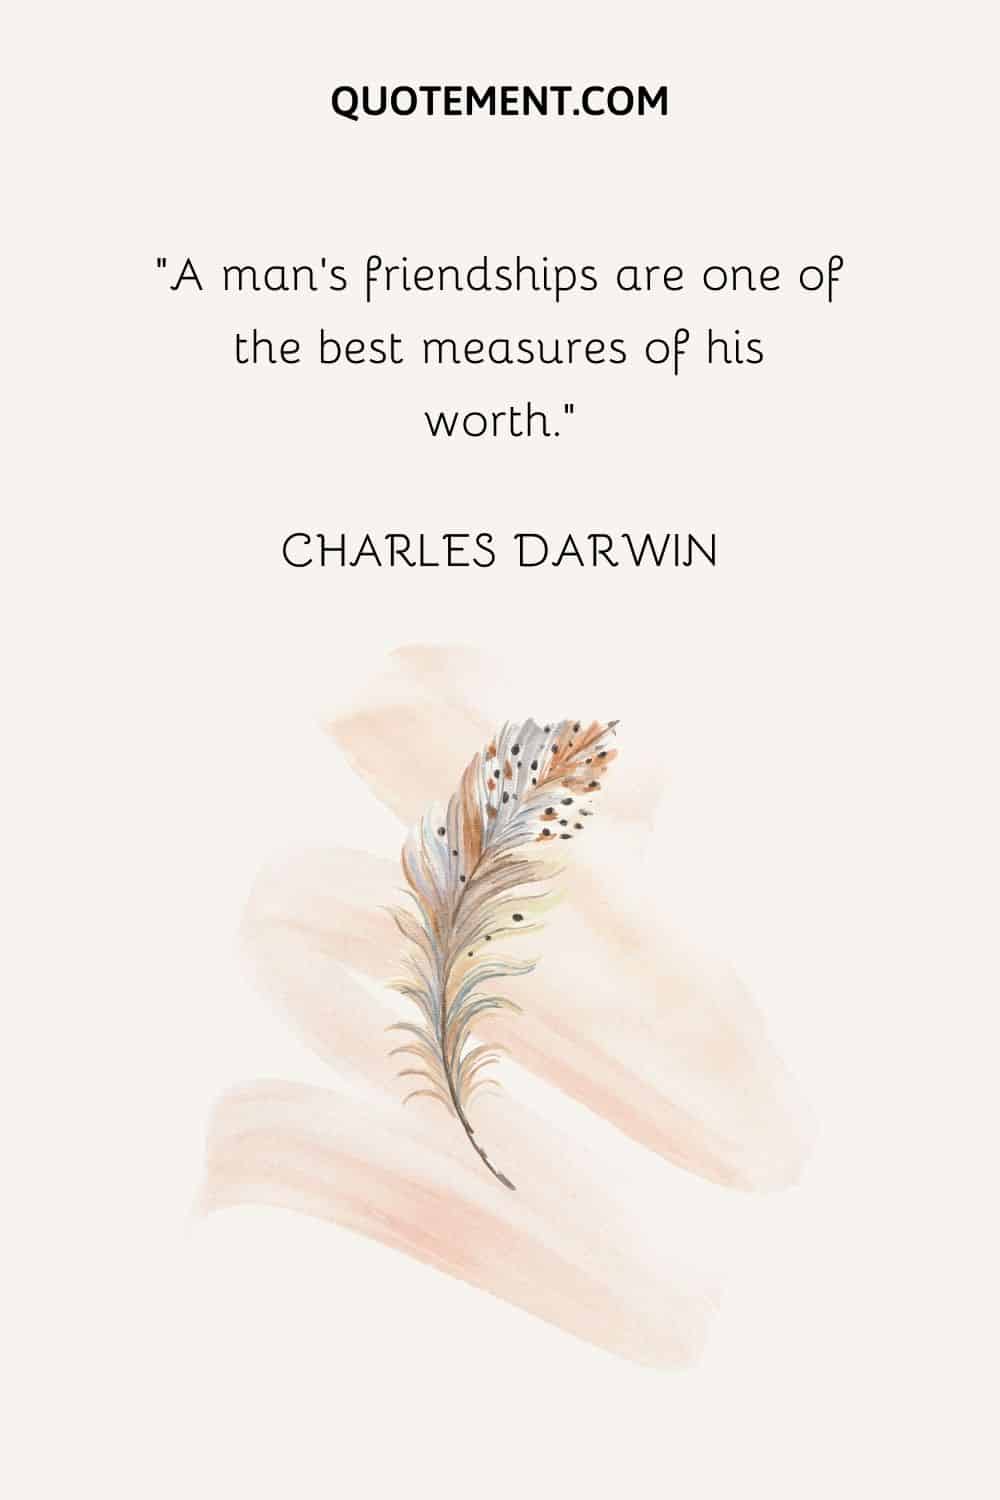 A man's friendships are one of the best measures of his worth. — Charles Darwin